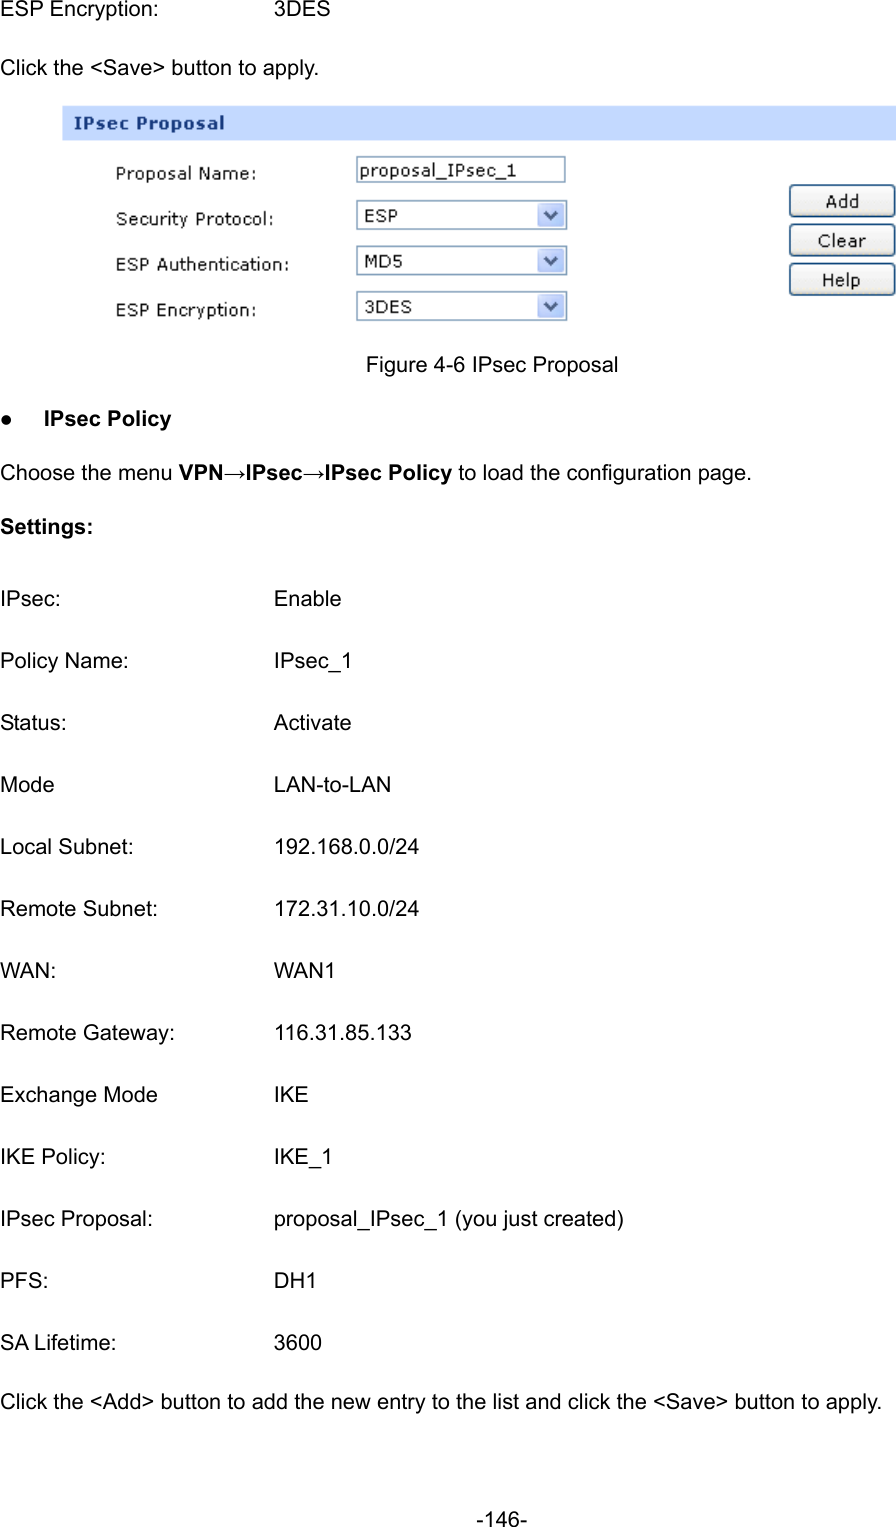  -146- ESP Encryption:  3DES Click the &lt;Save&gt; button to apply.  Figure 4-6 IPsec Proposal z IPsec Policy Choose the menu VPN→IPsec→IPsec Policy to load the configuration page.   Settings: IPsec: Enable Policy Name:  IPsec_1 Status: Activate Mode LAN-to-LAN Local Subnet:  192.168.0.0/24 Remote Subnet:  172.31.10.0/24 WAN: WAN1 Remote Gateway:  116.31.85.133 Exchange Mode  IKE IKE Policy:  IKE_1 IPsec Proposal:  proposal_IPsec_1 (you just created) PFS: DH1 SA Lifetime:  3600 Click the &lt;Add&gt; button to add the new entry to the list and click the &lt;Save&gt; button to apply. 